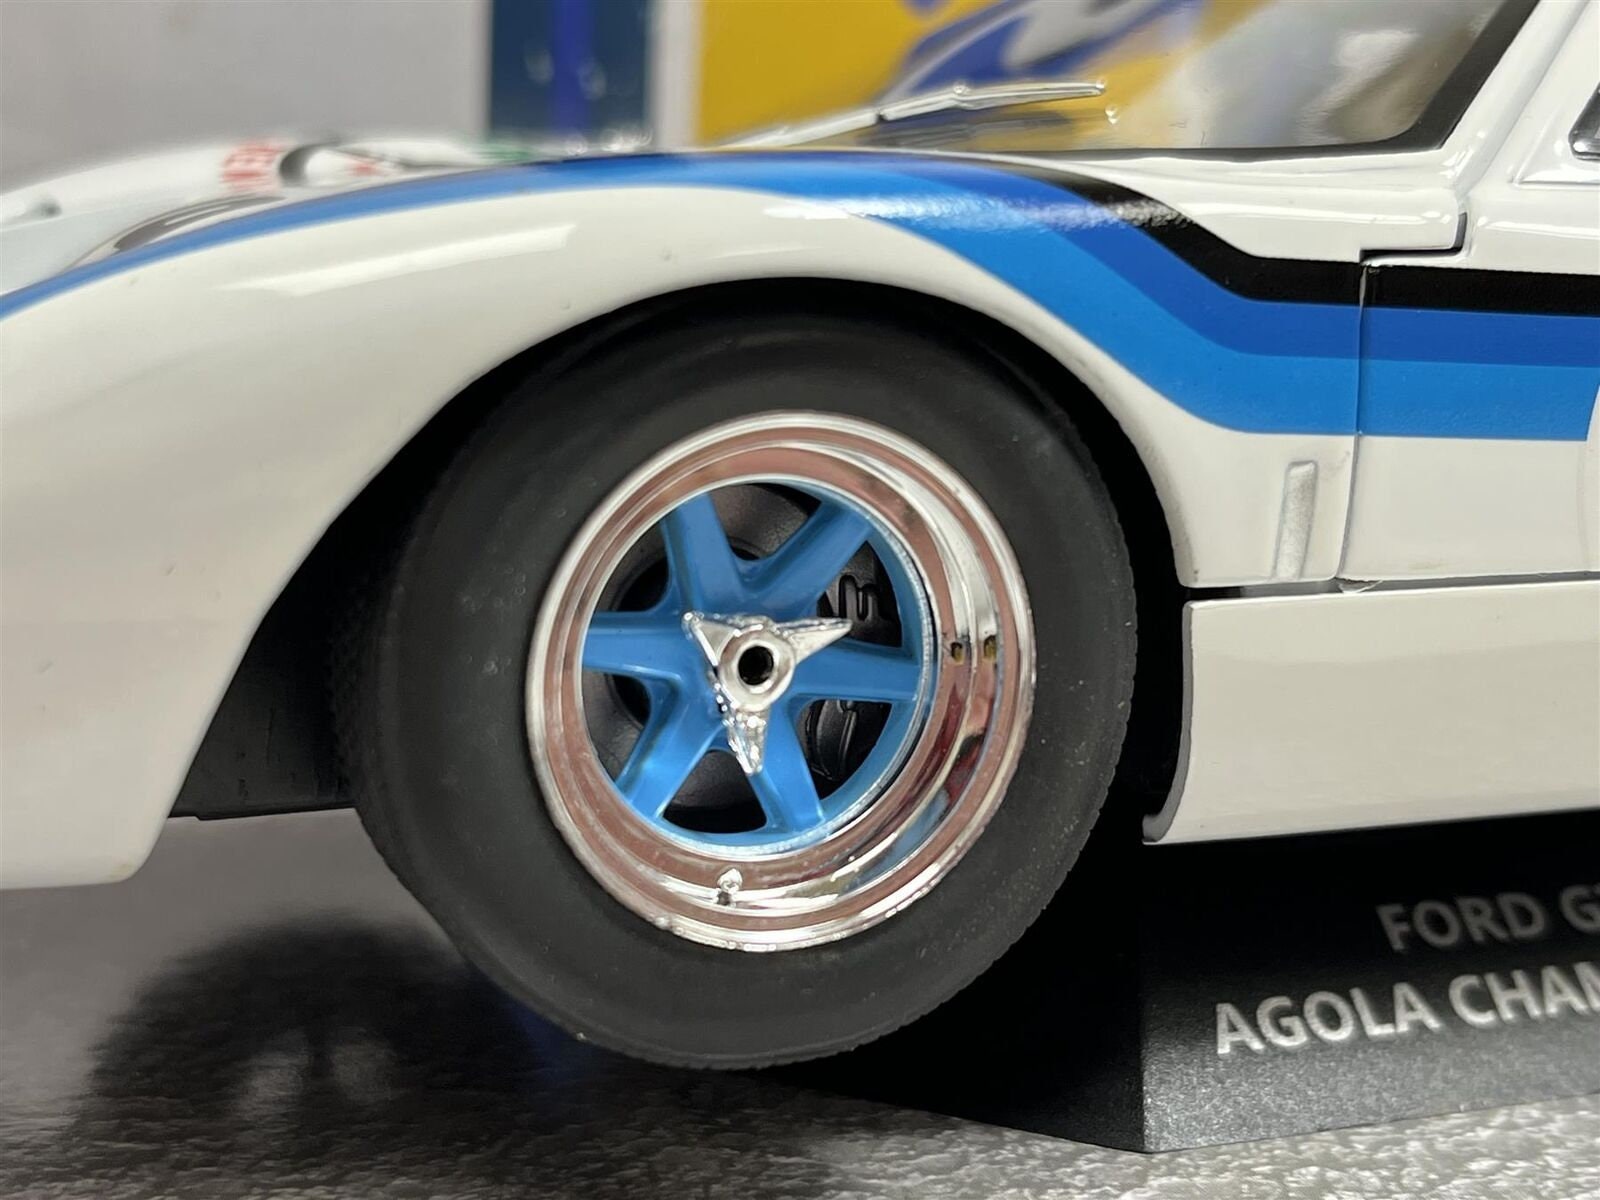 SOLIDO 1/18 – FORD GT40 MK1 – 1968 - Five Diecast